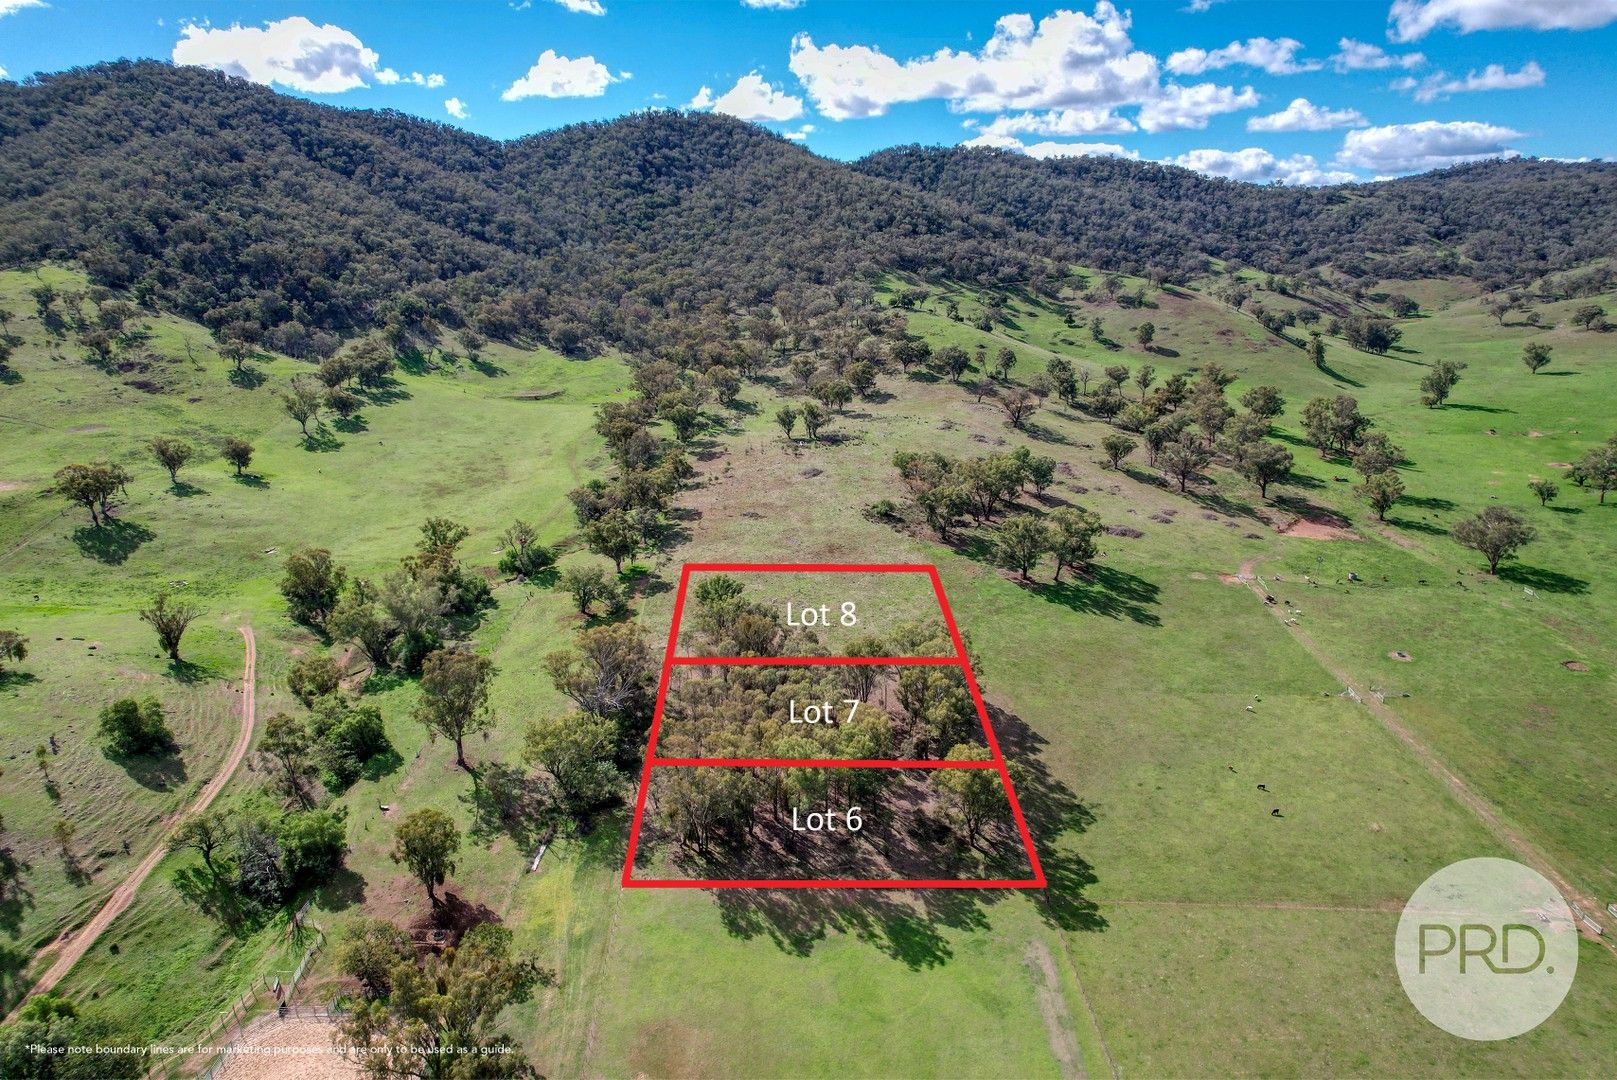 Lot 6 DP 24002 Commons Road, Nundle Road, Dungowan NSW 2340, Image 0